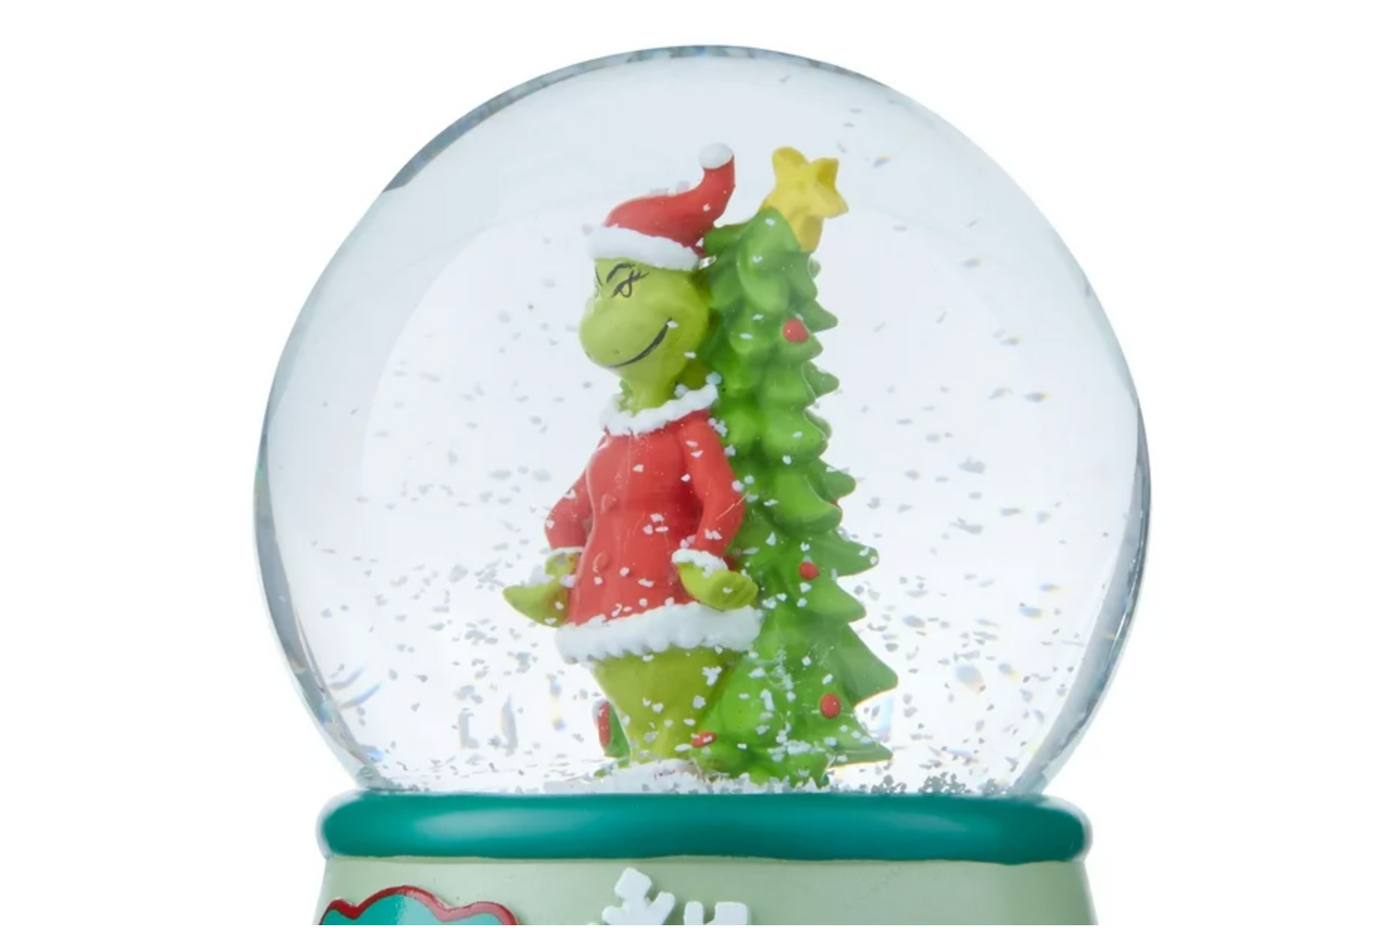 Dr. Seuss' The Grinch Who Stole Christmas Grinch Snow Globe Jingle Bells New